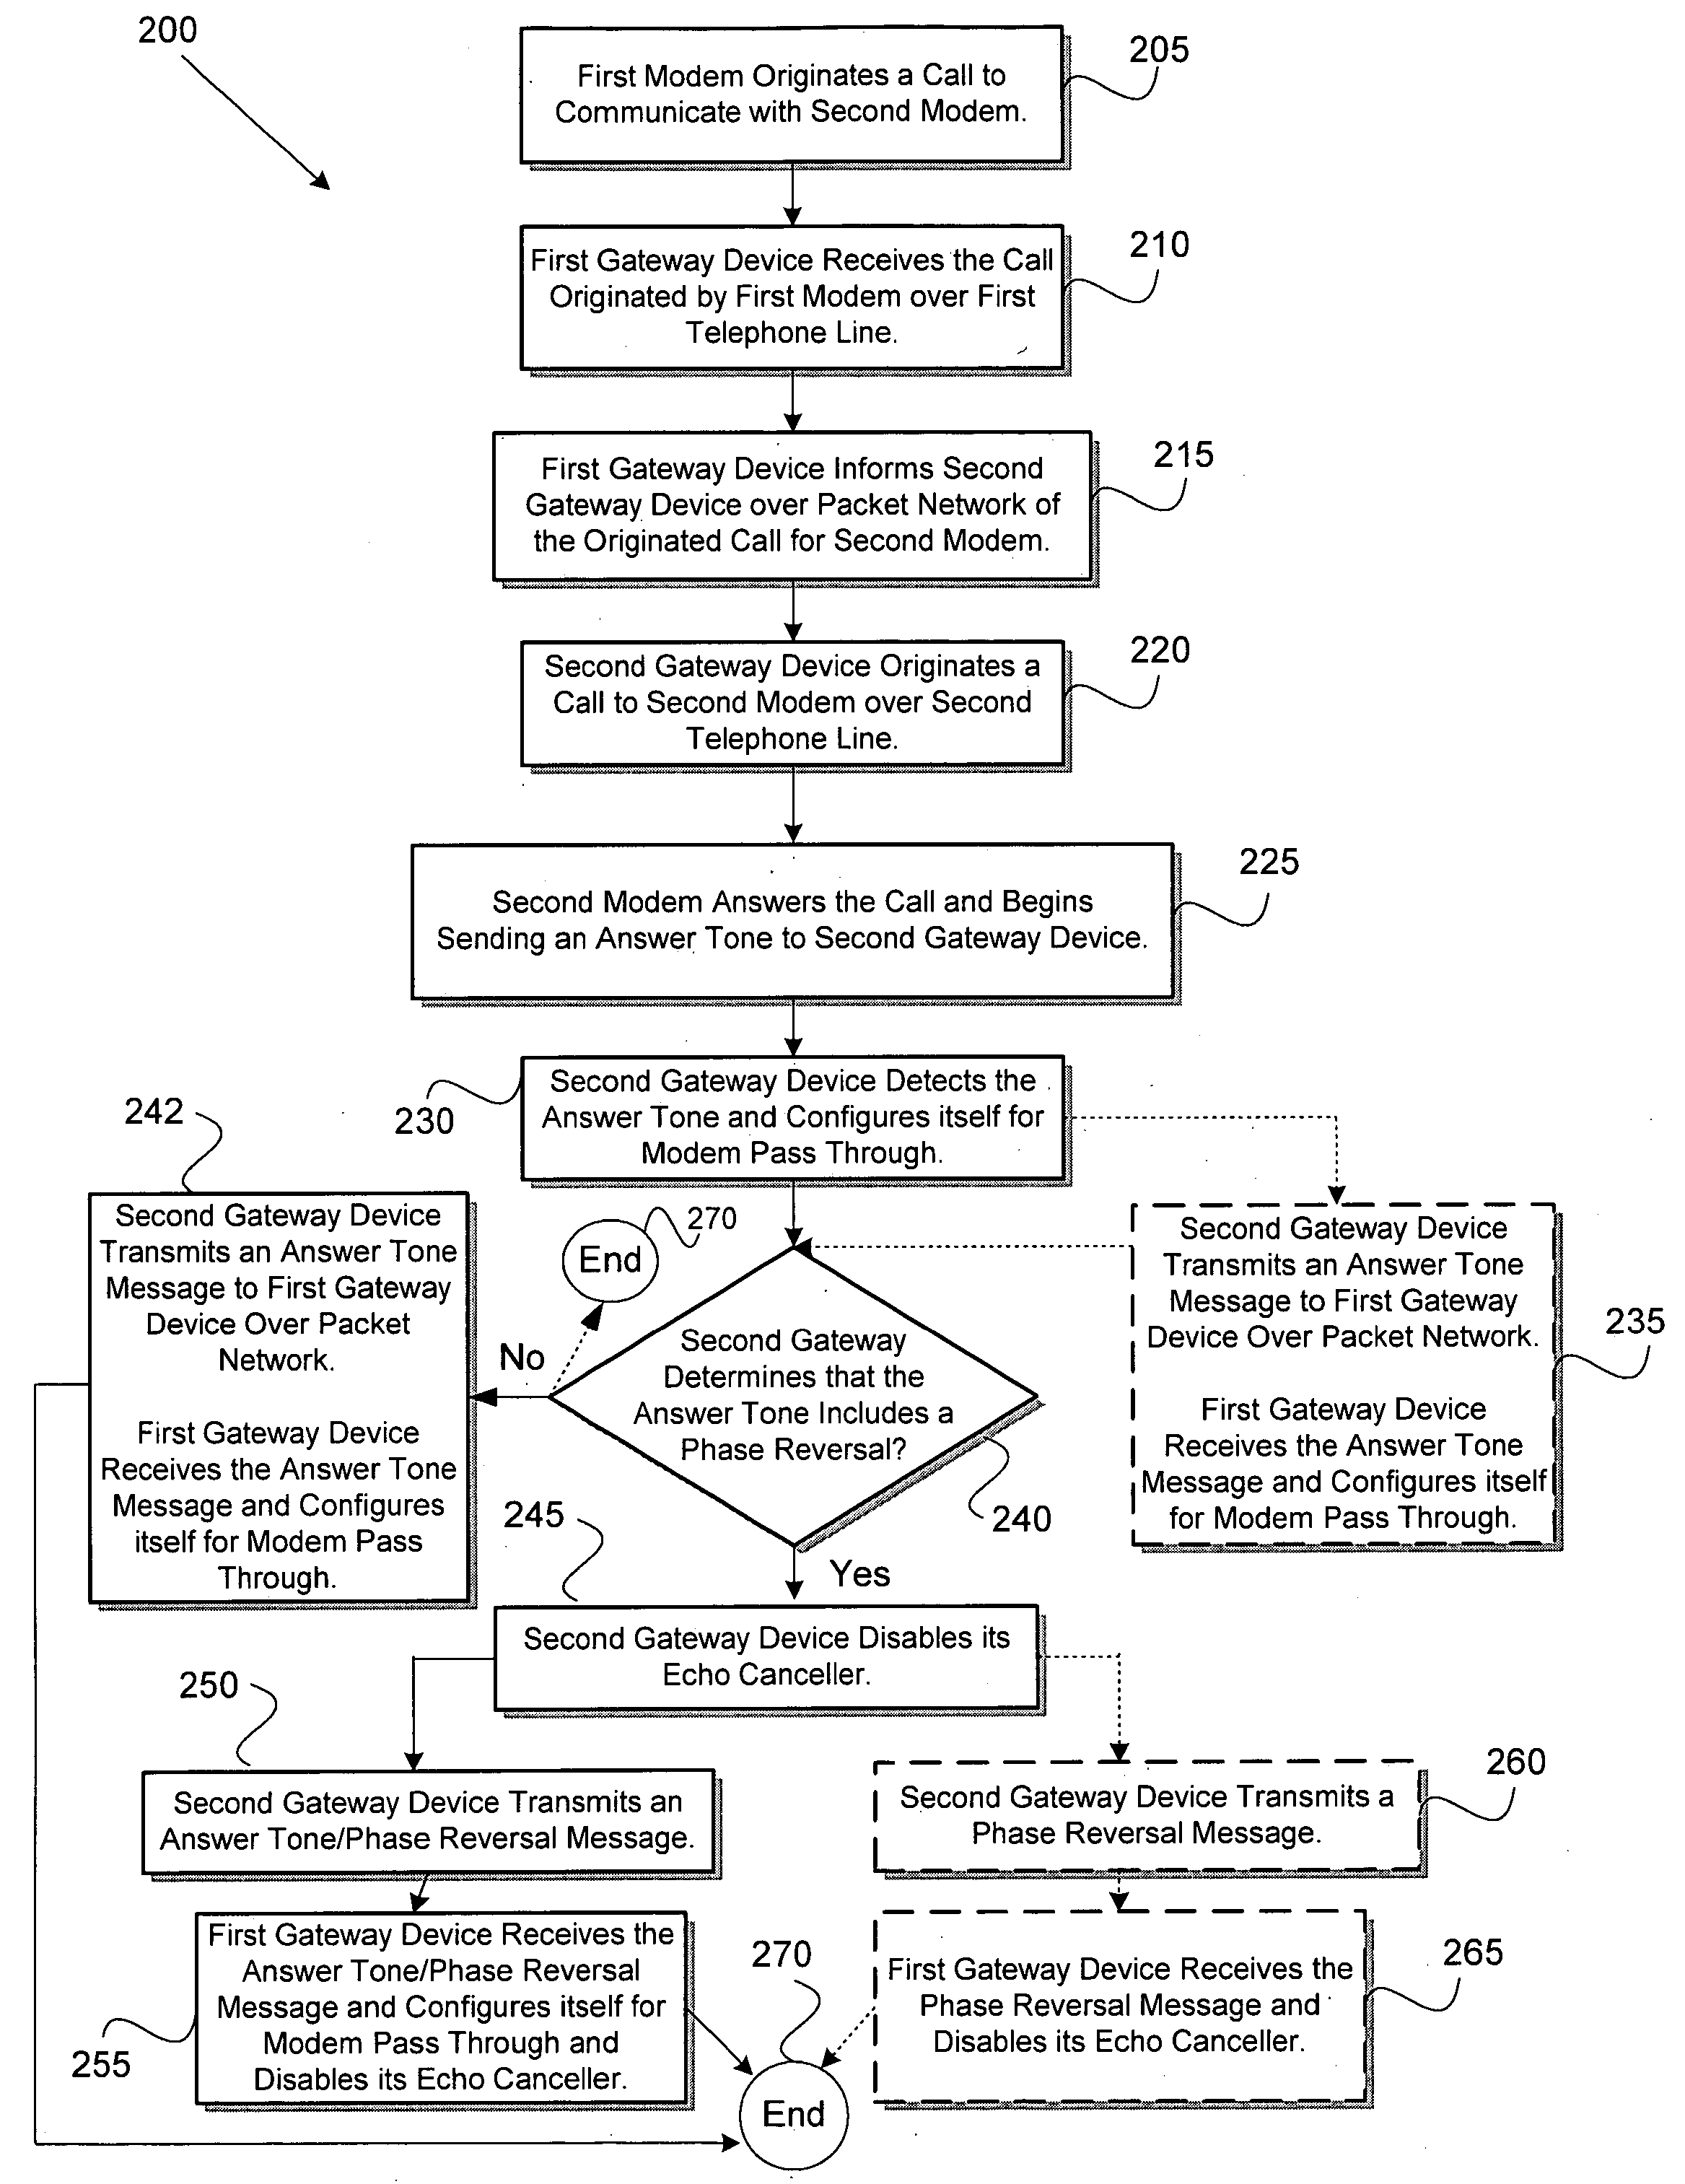 Method and system for configuring gateways to facilitate a modem connection over a packet network